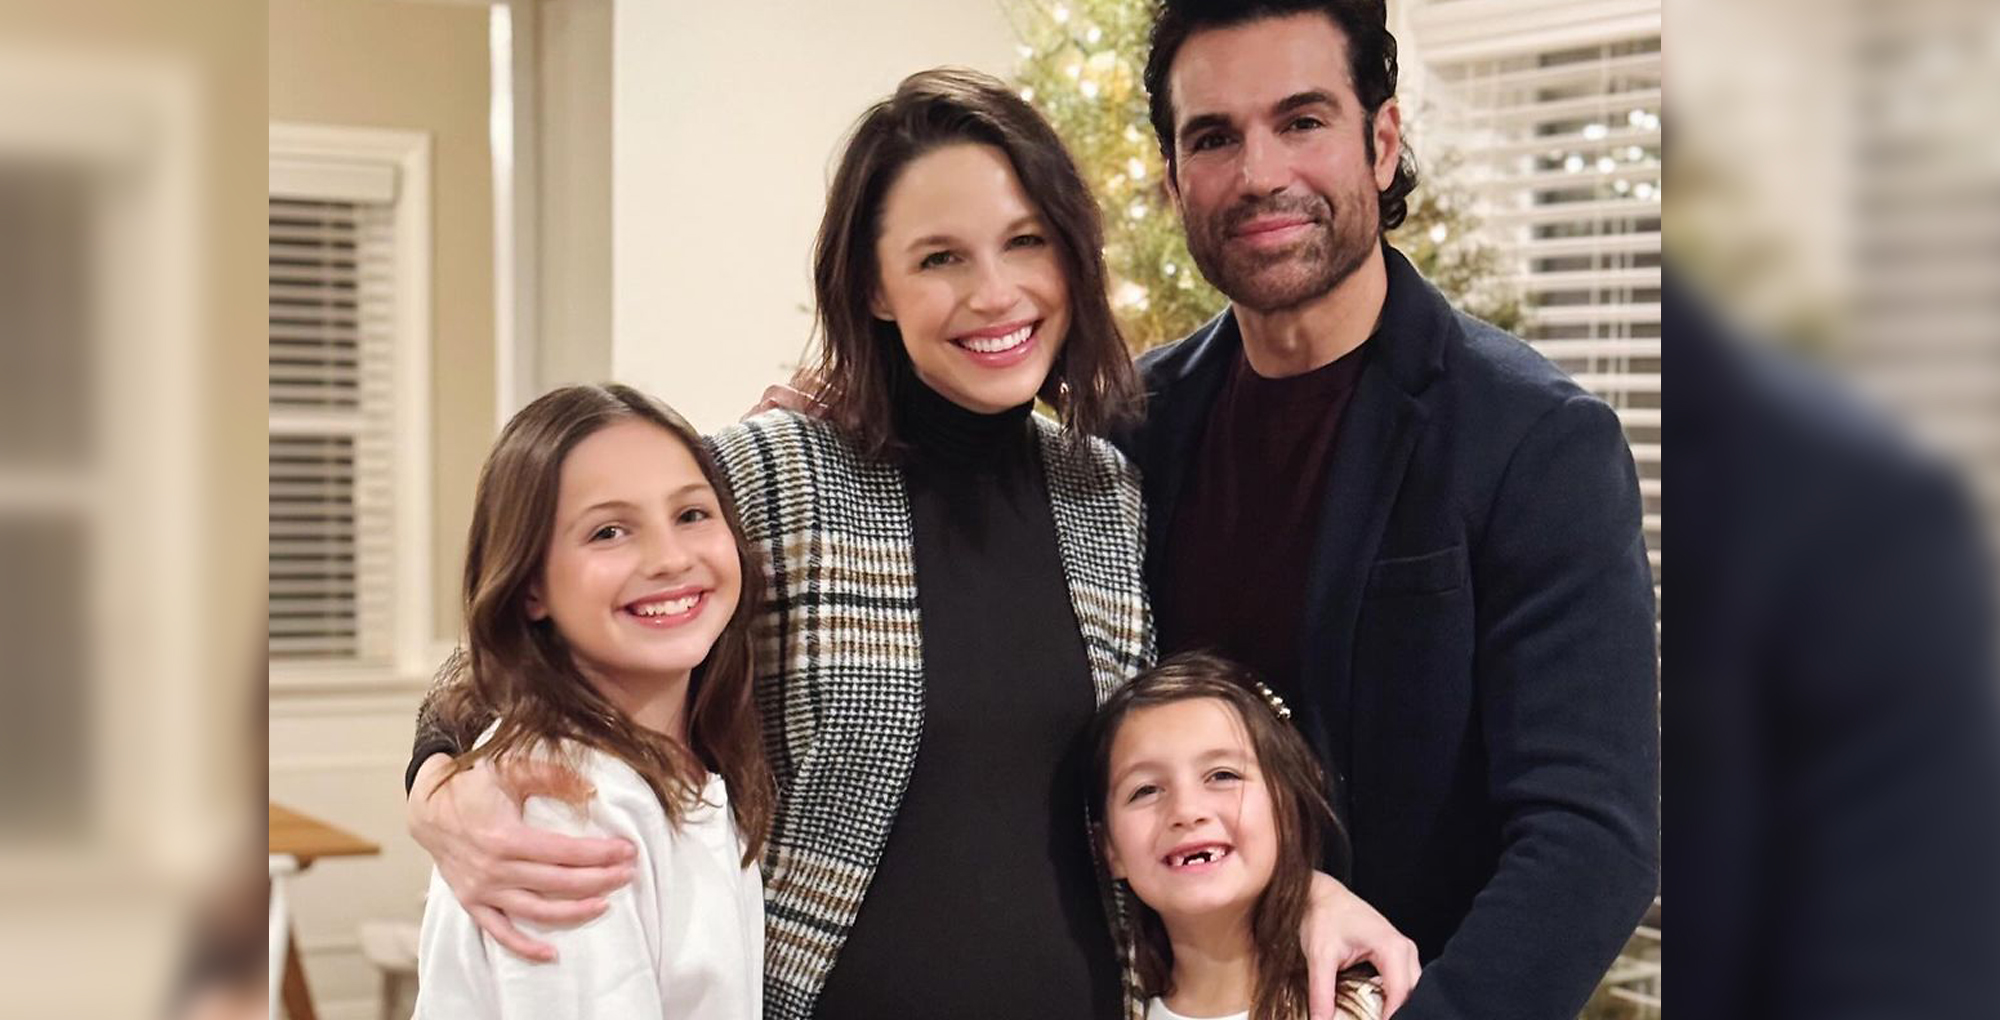 jordi vilasuso, wife kaitlin, and their two daughters.